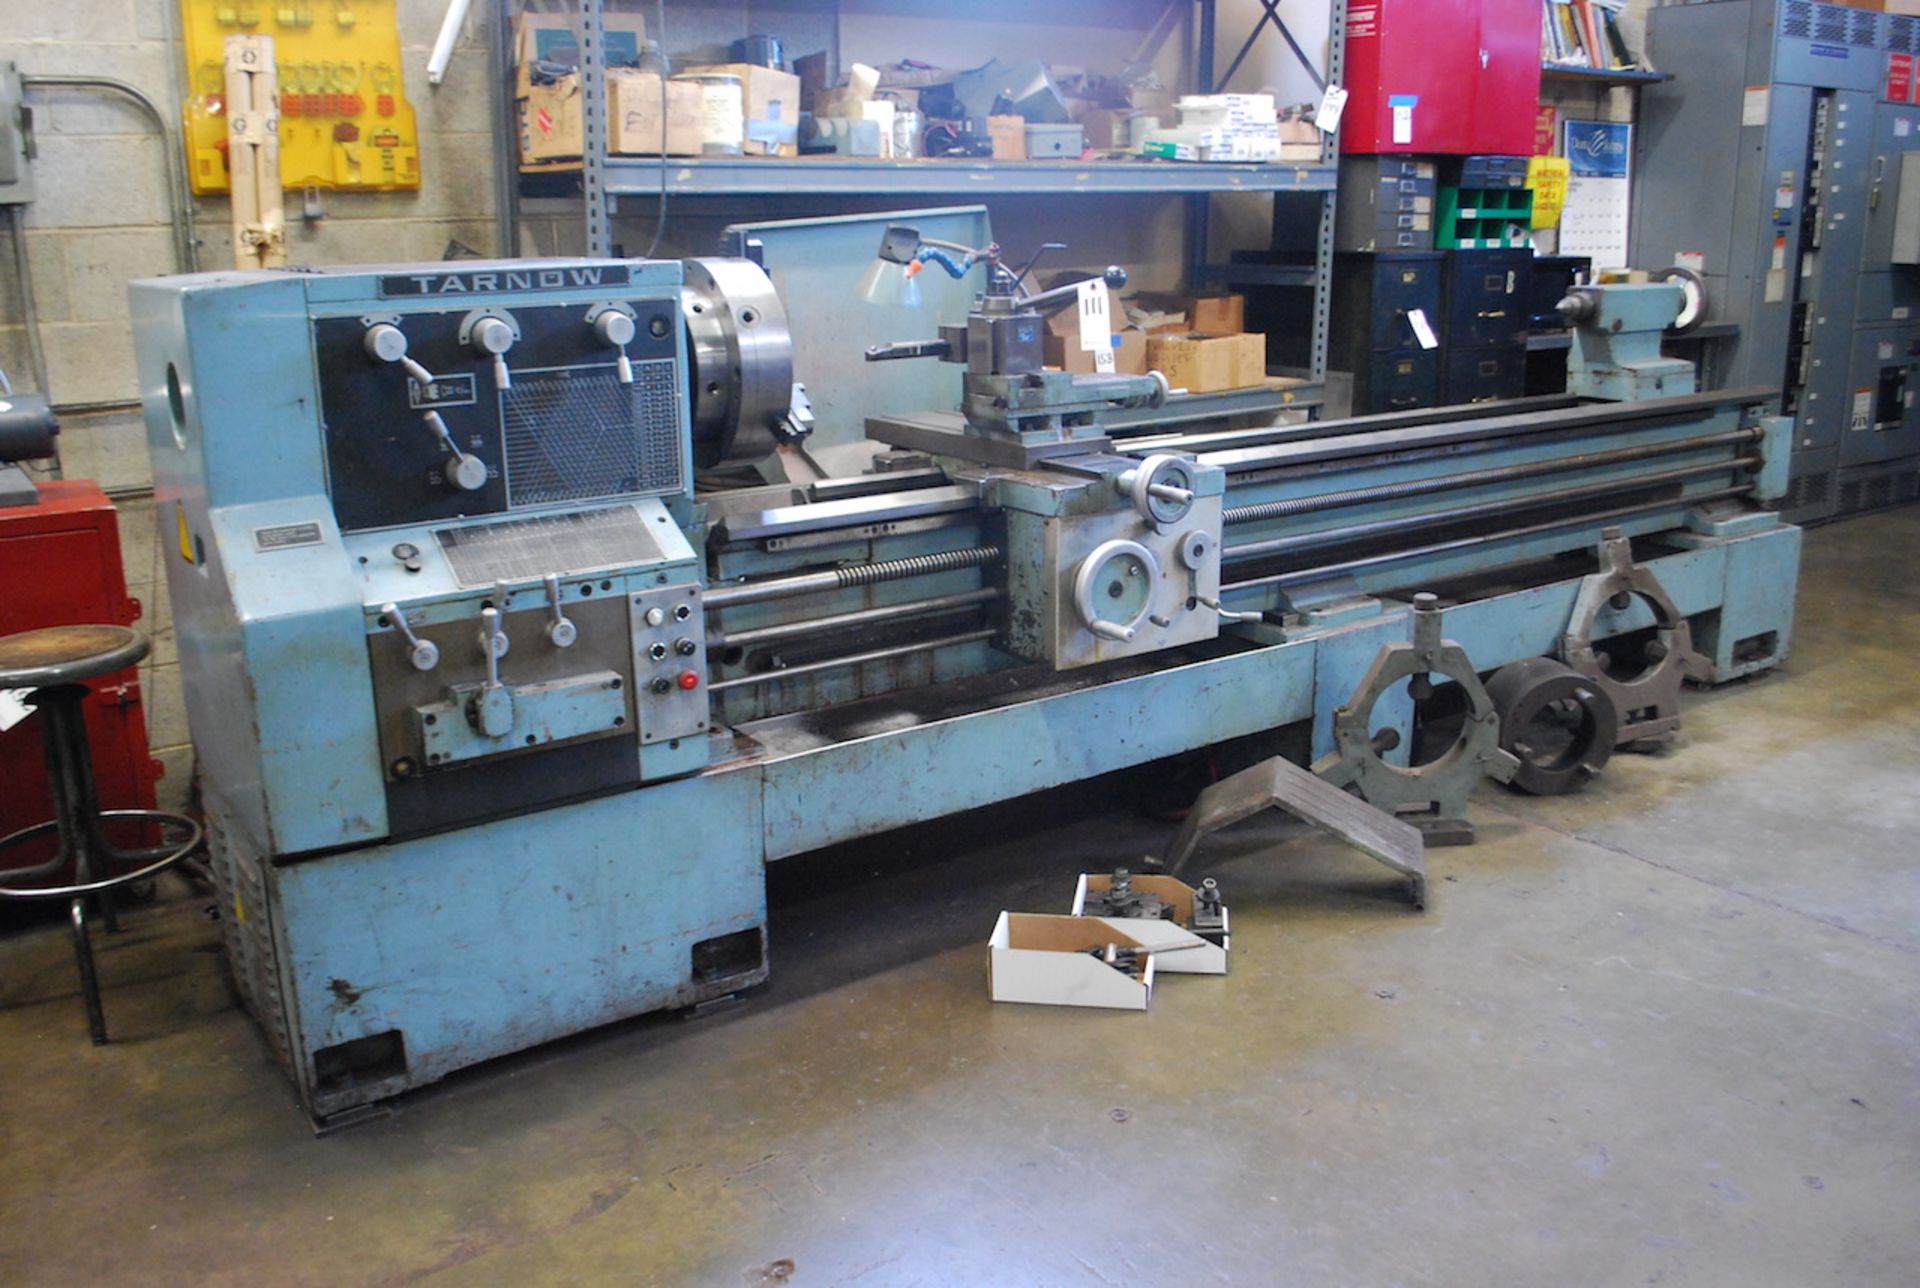 TARNOW 21"/30" X 120" (APPROX.) MODEL TUJ 50M REMOVAL GAP BED ENGINE LATHE: S/N 651-127-16/